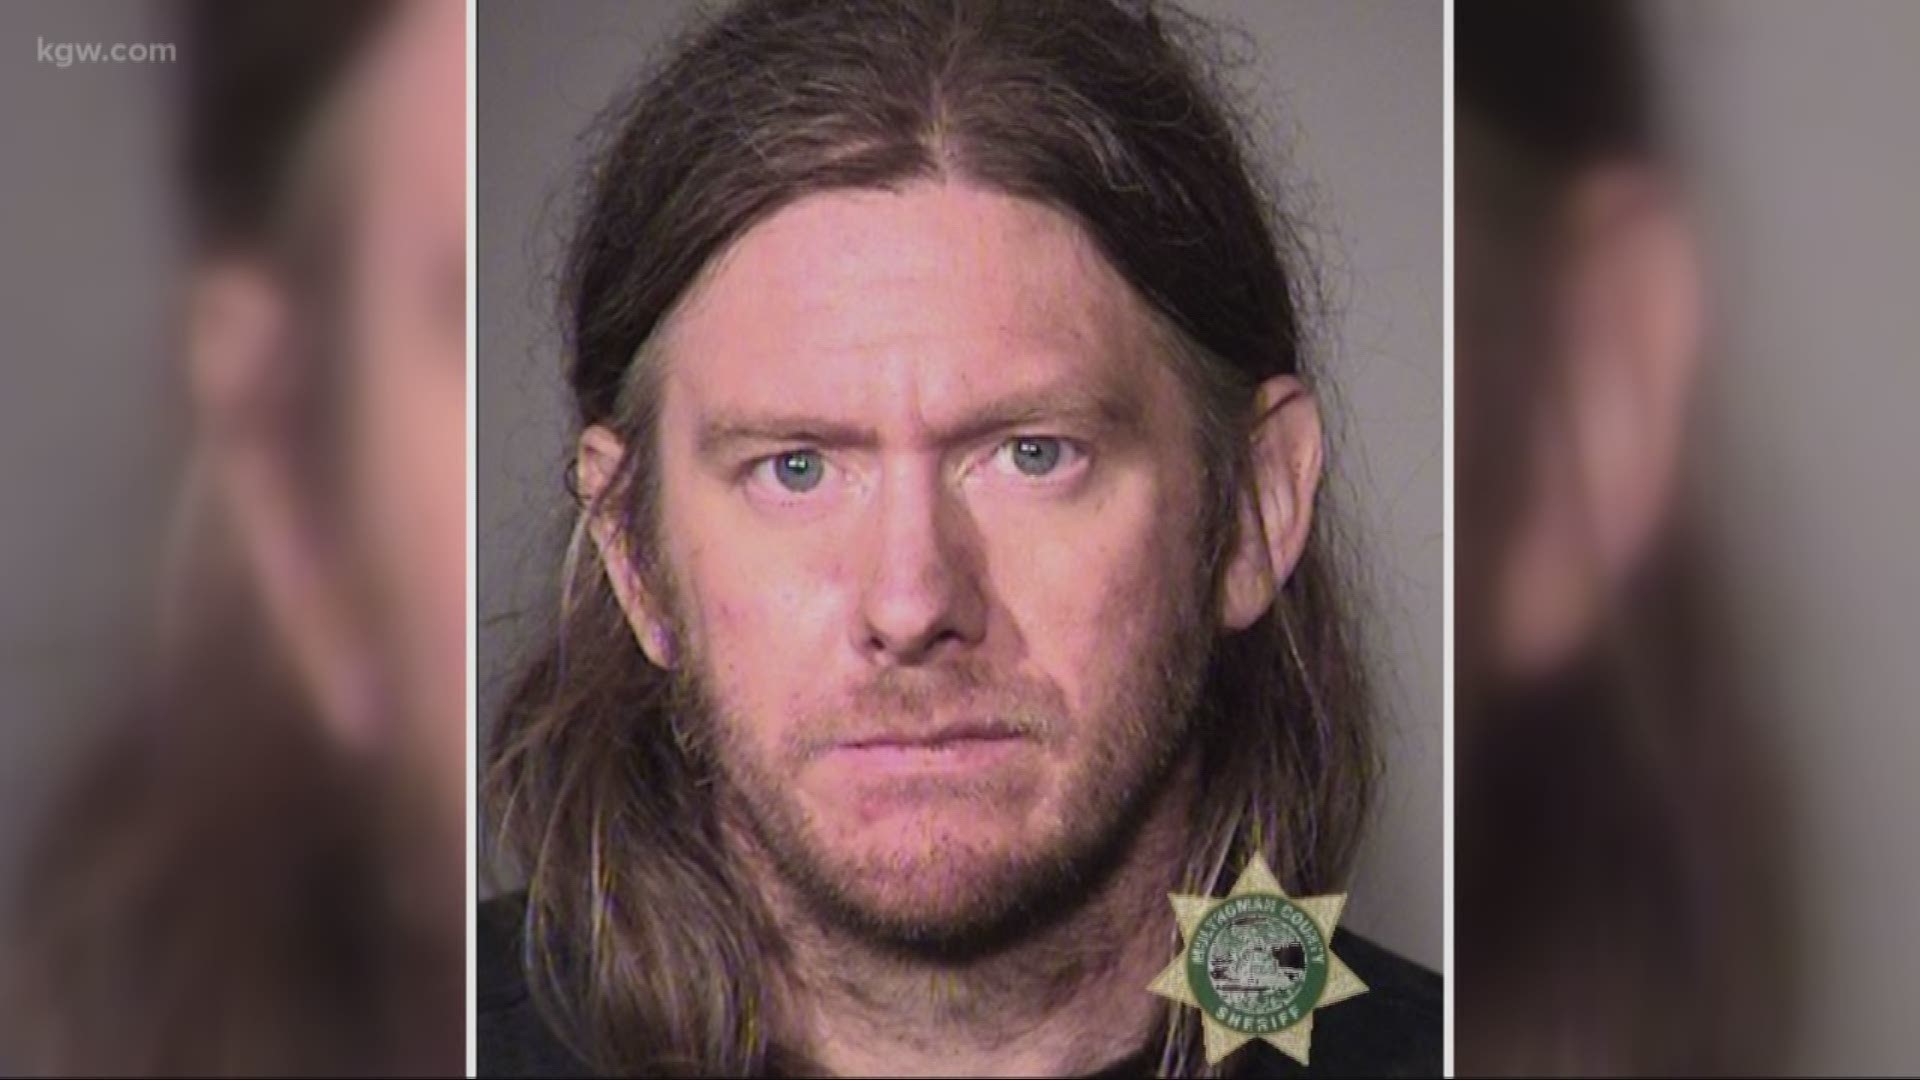 A burglary suspect made himself at home in Gresham.